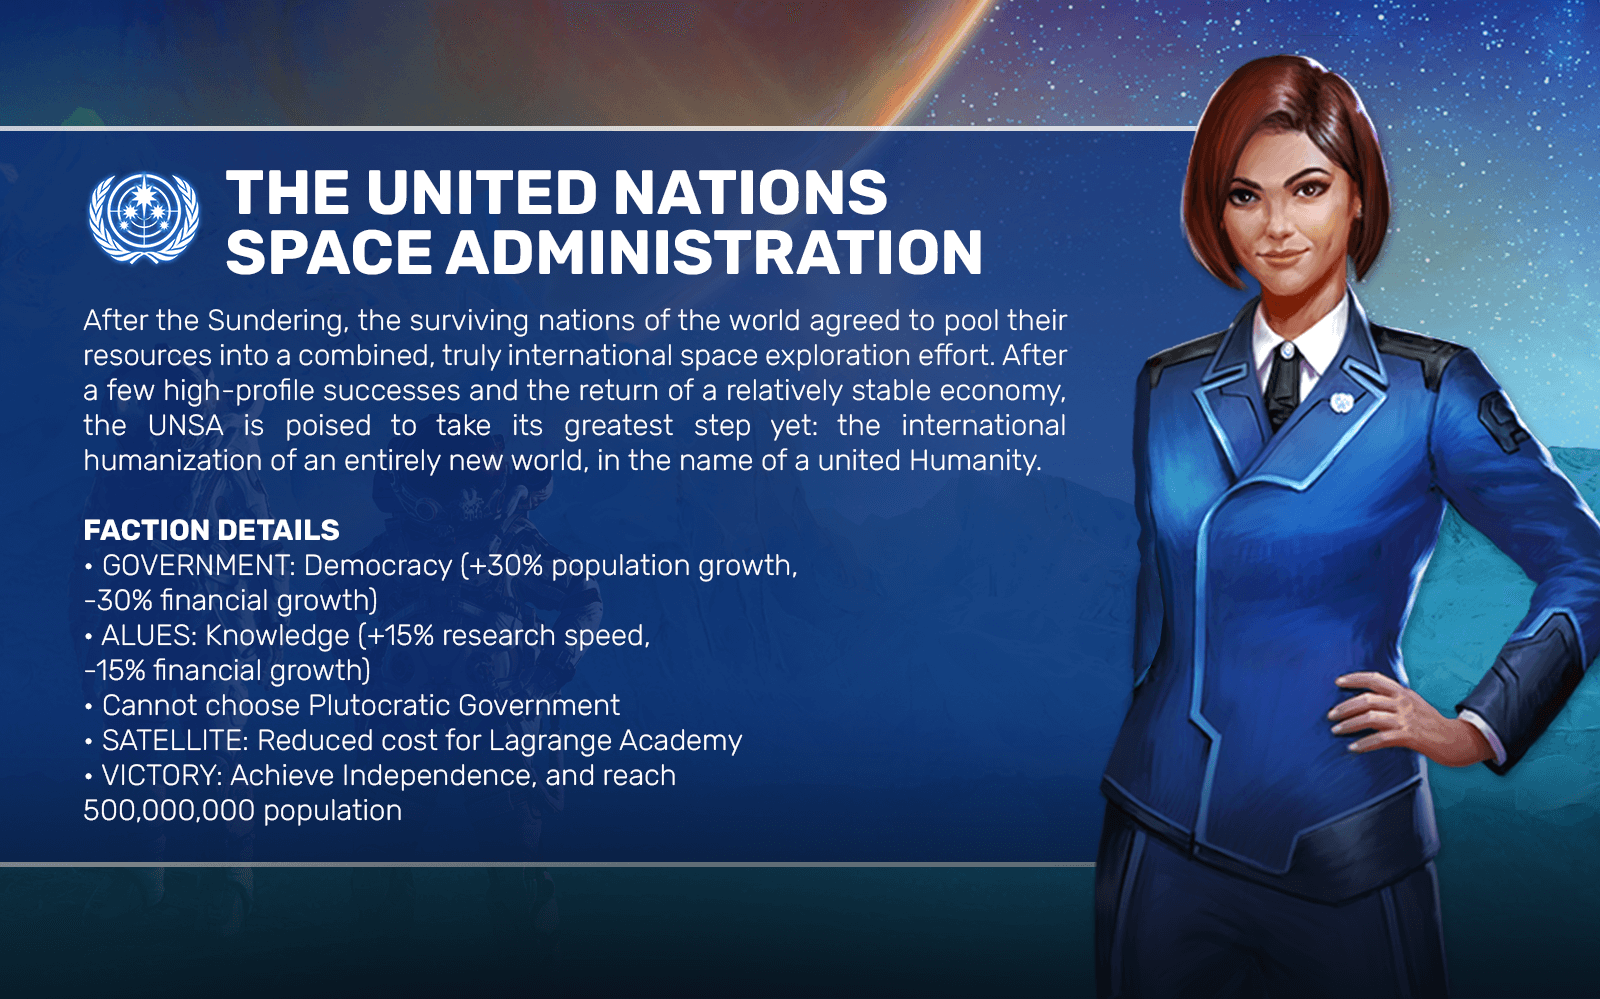 THE UNITED NATIONS SPACE ADMINISTRATION